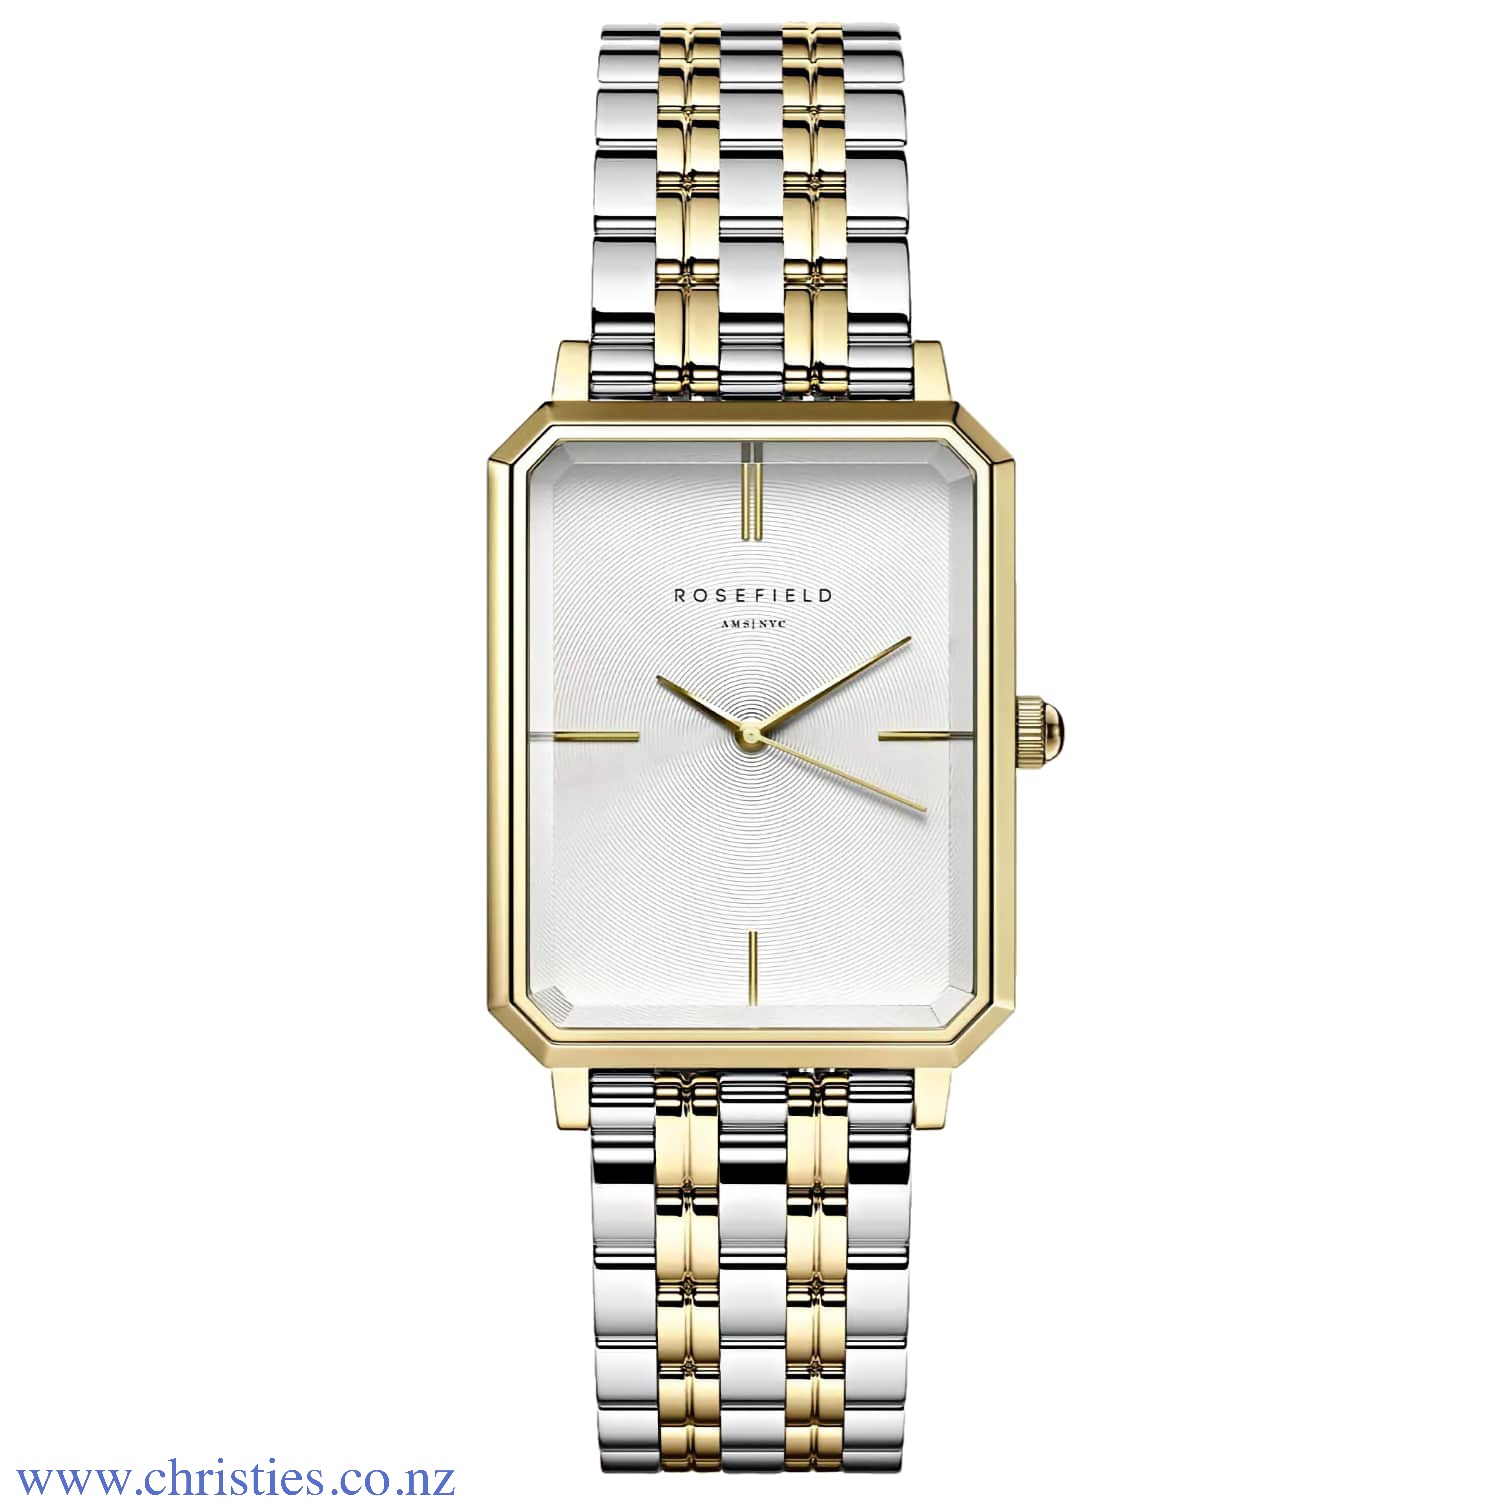 OWSSSG-O48 Rosefield The Octagon White Sunray Steel Silver Watch. The Octagon is Rosefield's newest collection of modern watches – an instant classic. The rare octagonal face shape and polished 5-link bracelet recall 1920s elegance, redefining the watch a